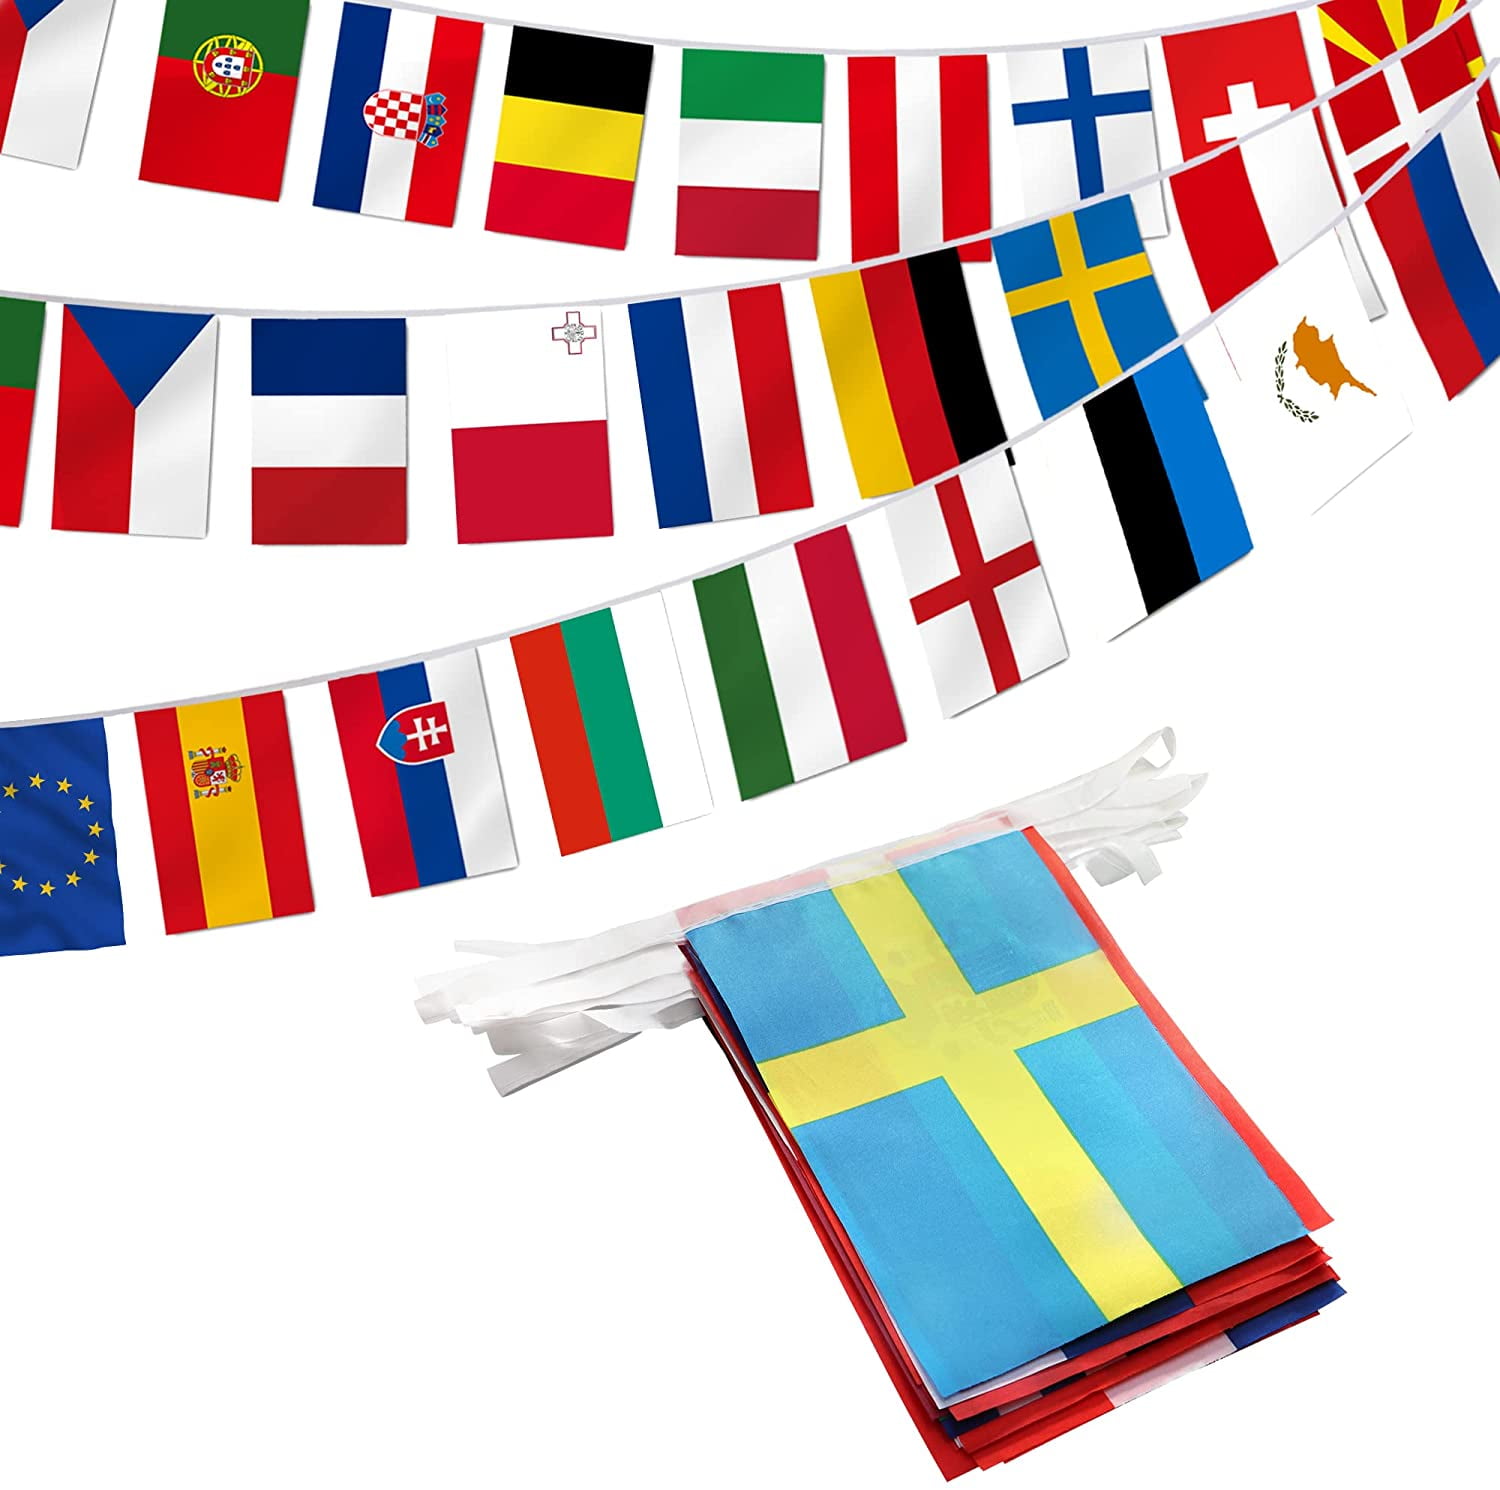 Marine Signalling Flags String of 26 flags Bunting 100% COTTON 11 Feet 